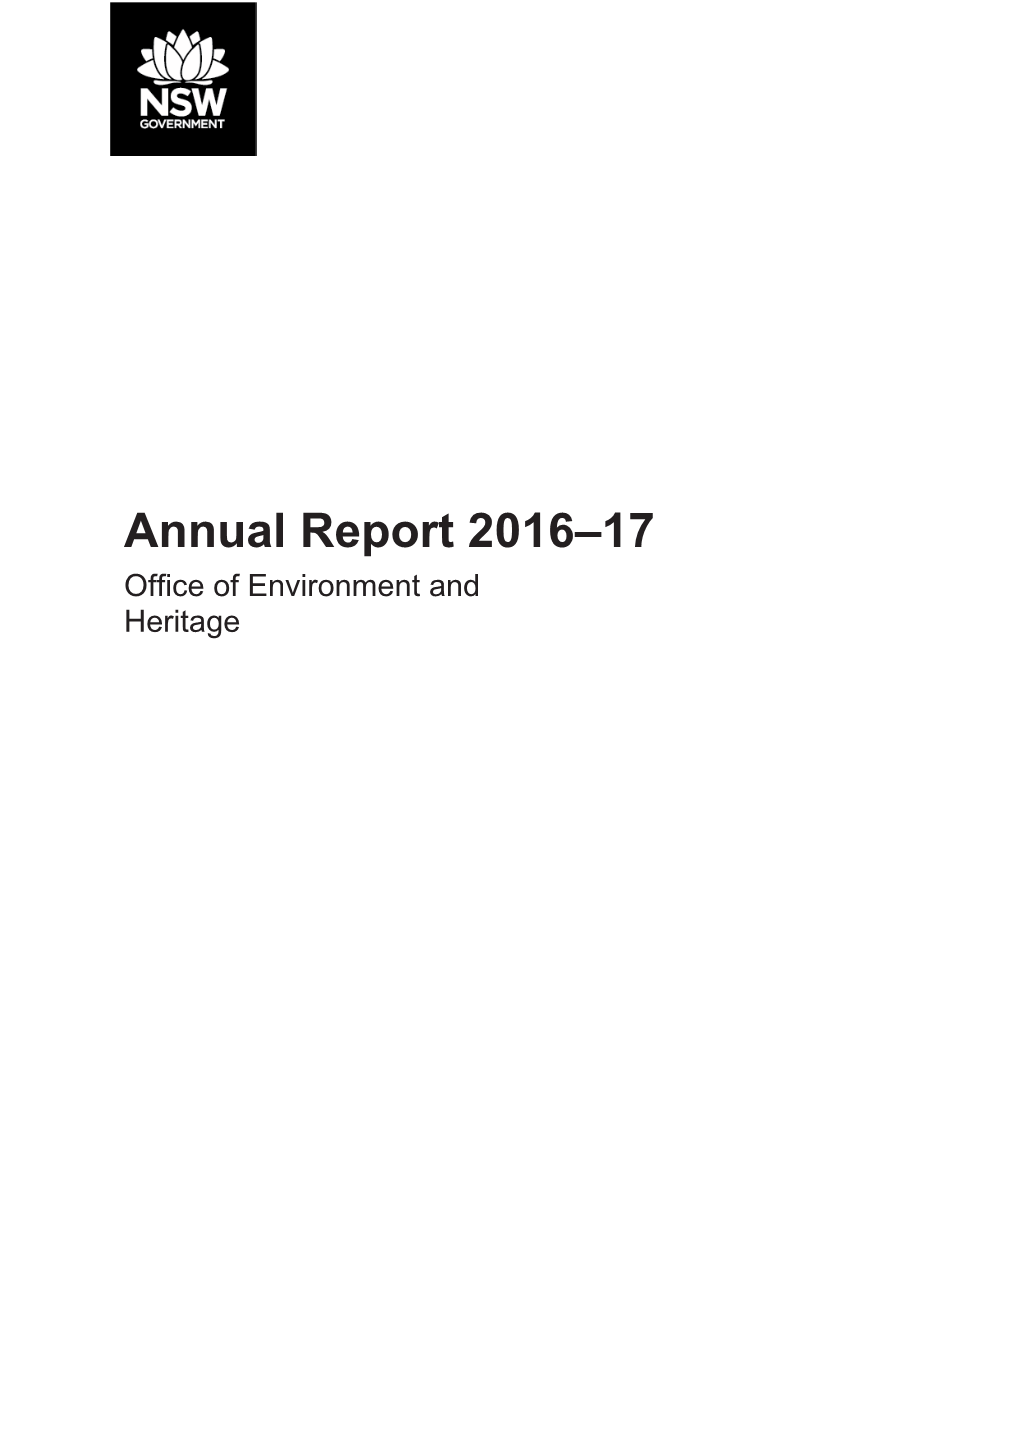 Office of Environment and Heritage Annual Report 2016-17Download